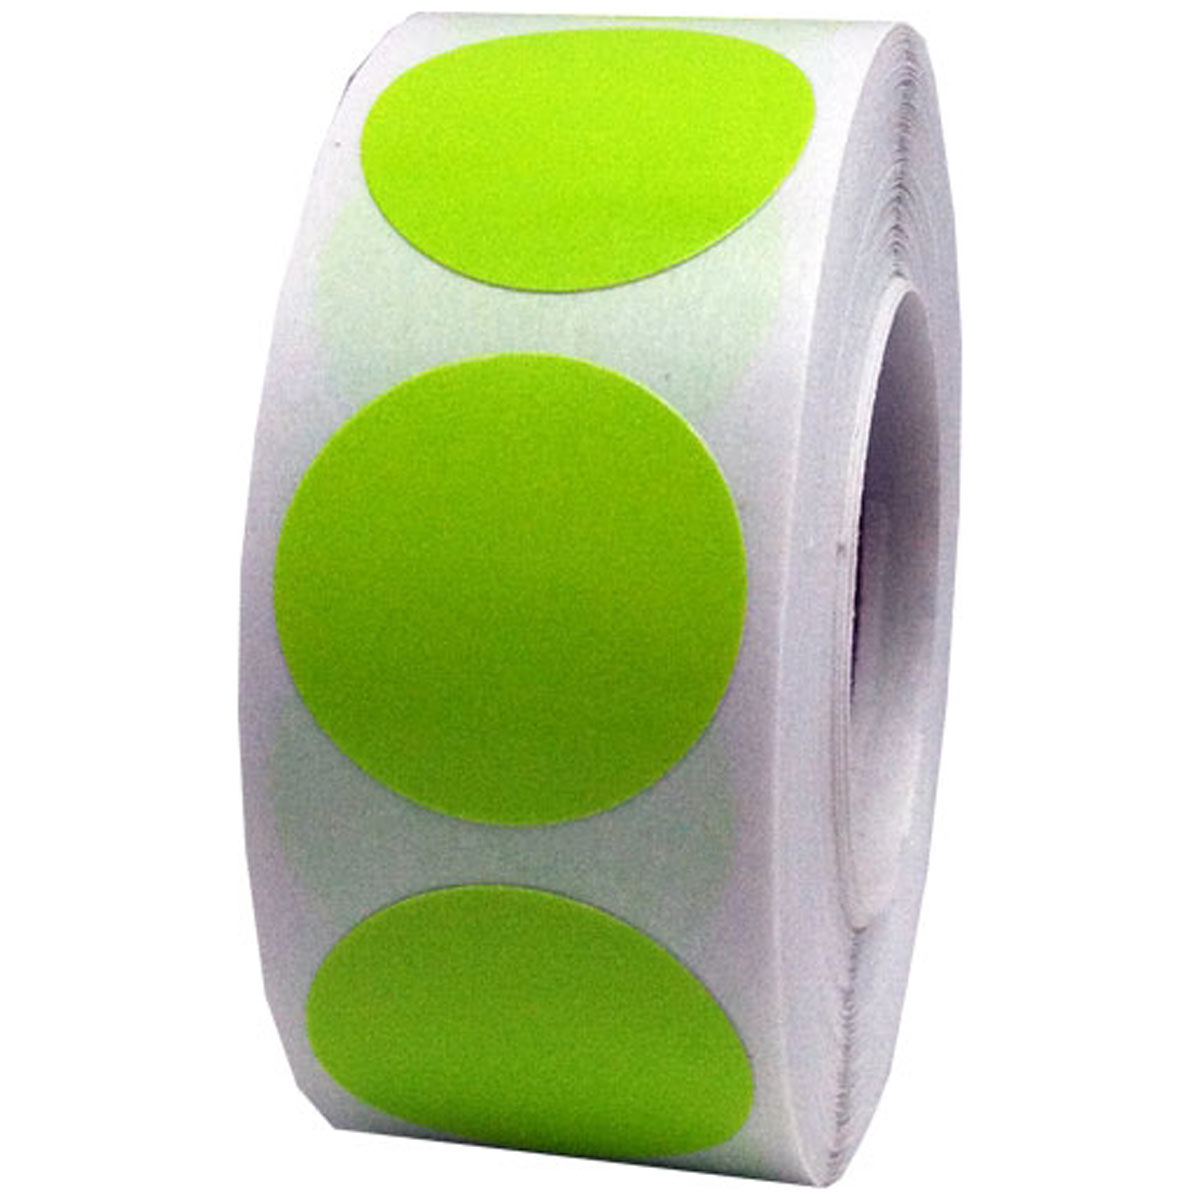 hot-green-color-code-labels-3-4-round-instocklabels